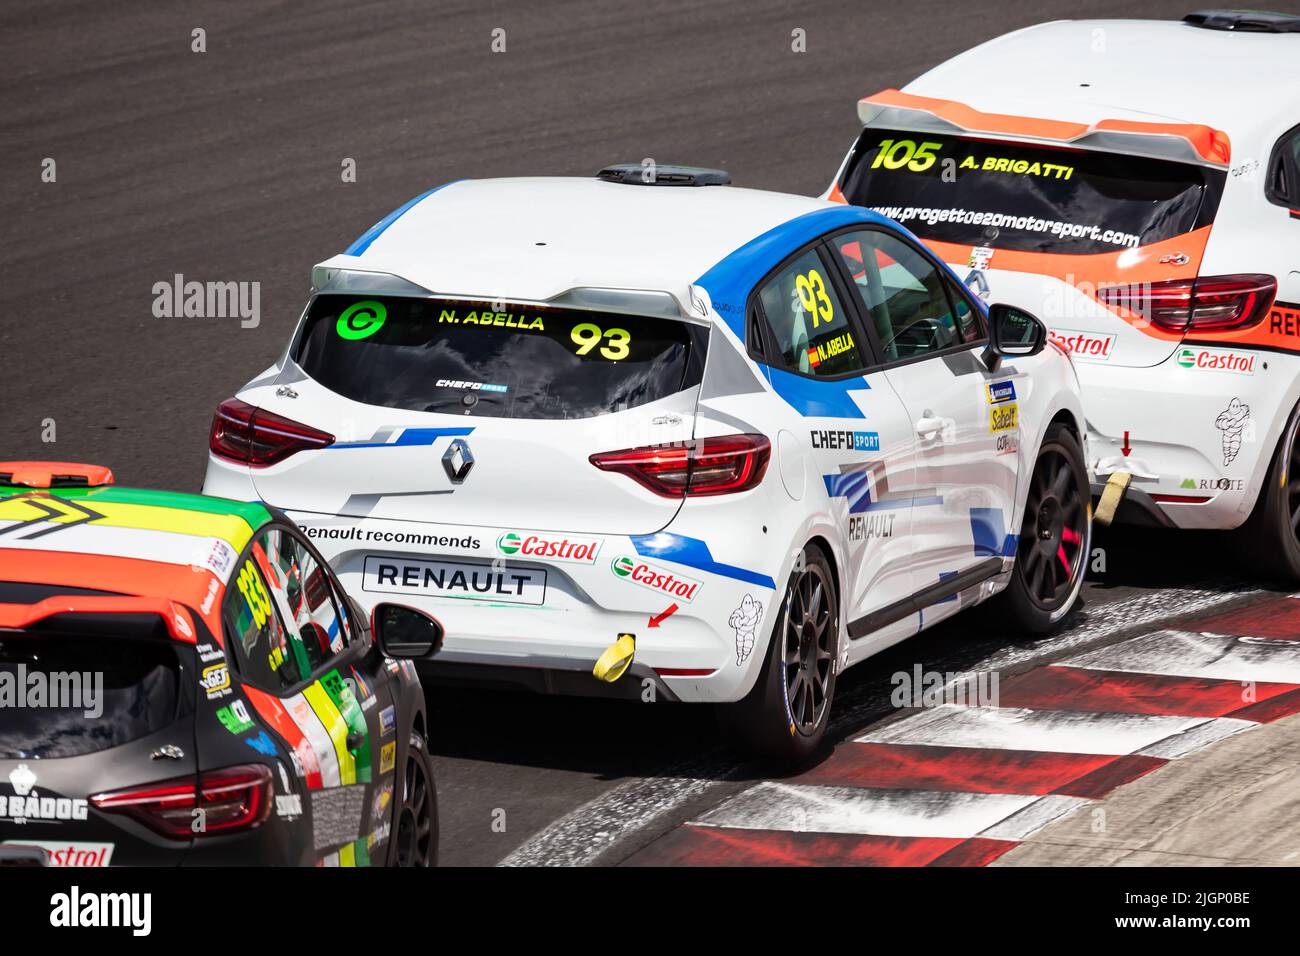 Mogyorod, Hungary - July 9, 2022: Renault Clio Cup Series. Motorsport and racing. Sport car and supercar. Grand prix and race. Action Photography. Stock Photo